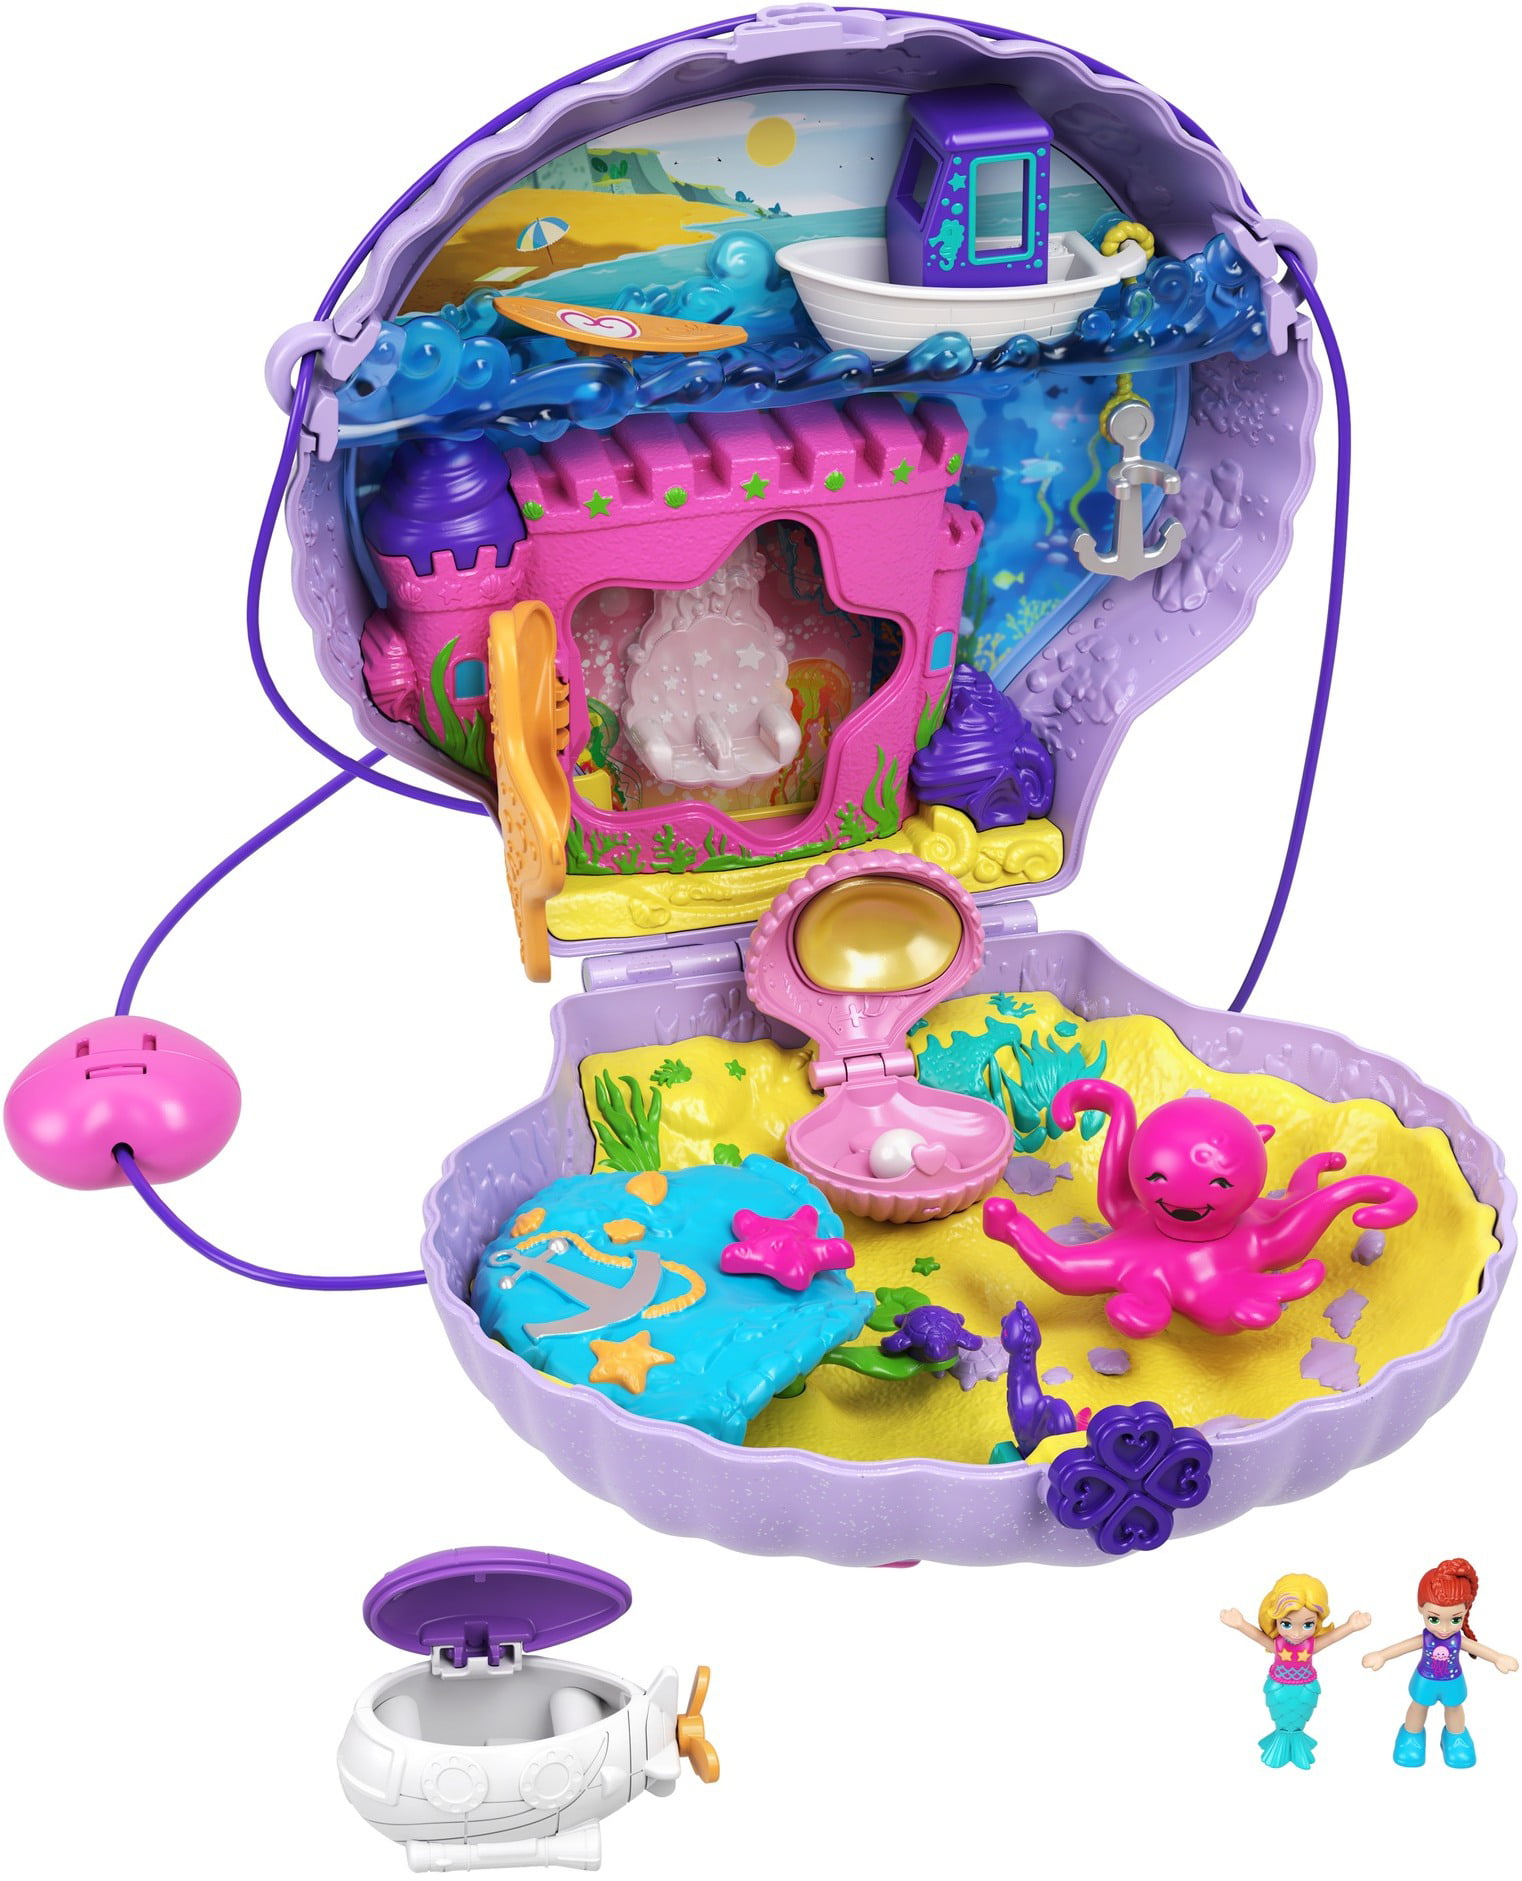 Polly pockets pictures